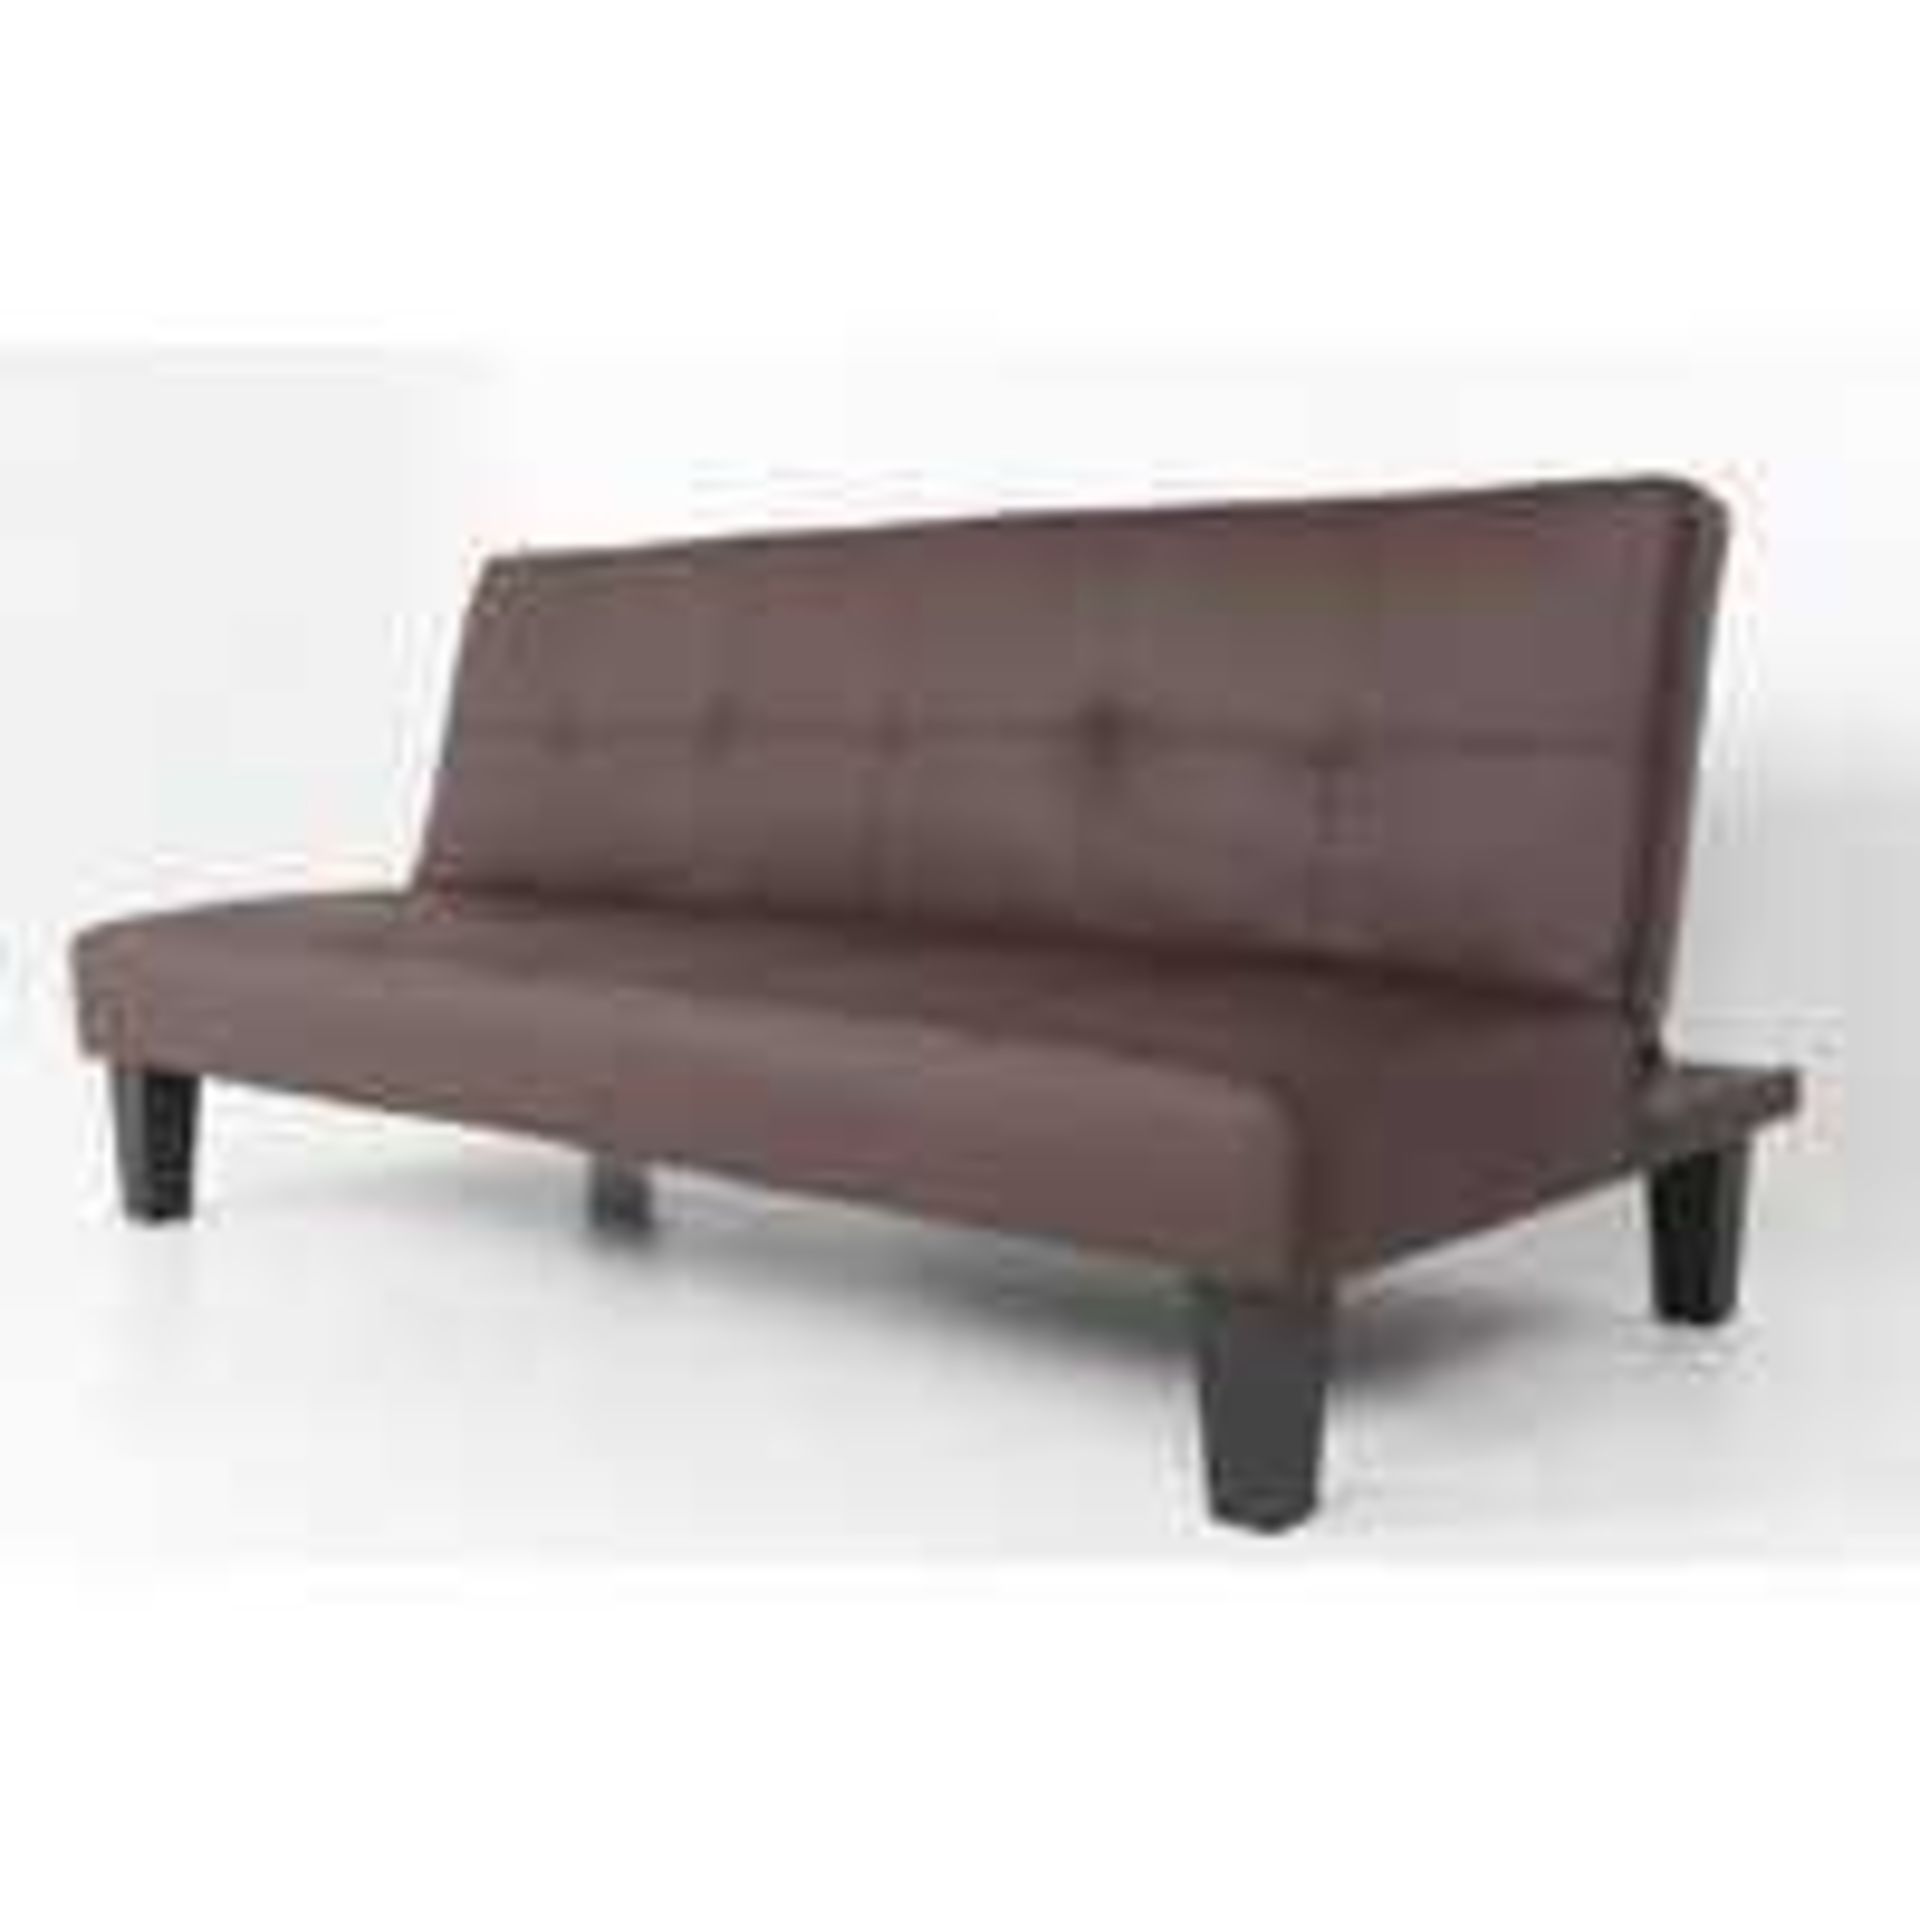 RRP £400 Lot To Contain 1 X Unpackaged Brown Leather Lay Down Sofa Bed With Square Sticking (Jm)